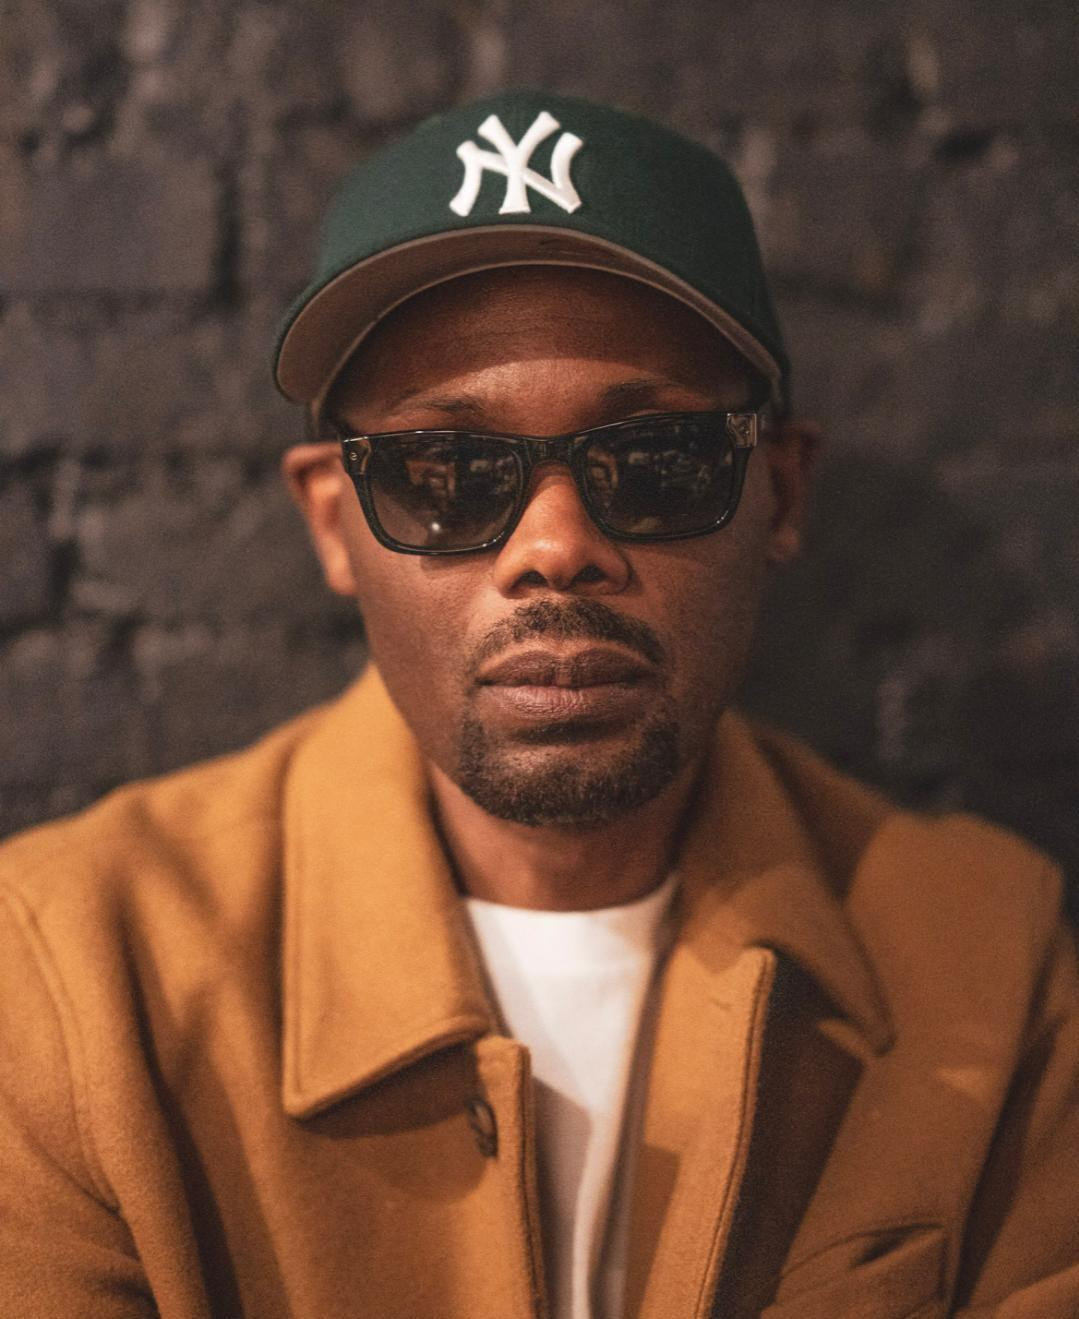 Cormega & Nas Release Single “Glorious” From New Album “The